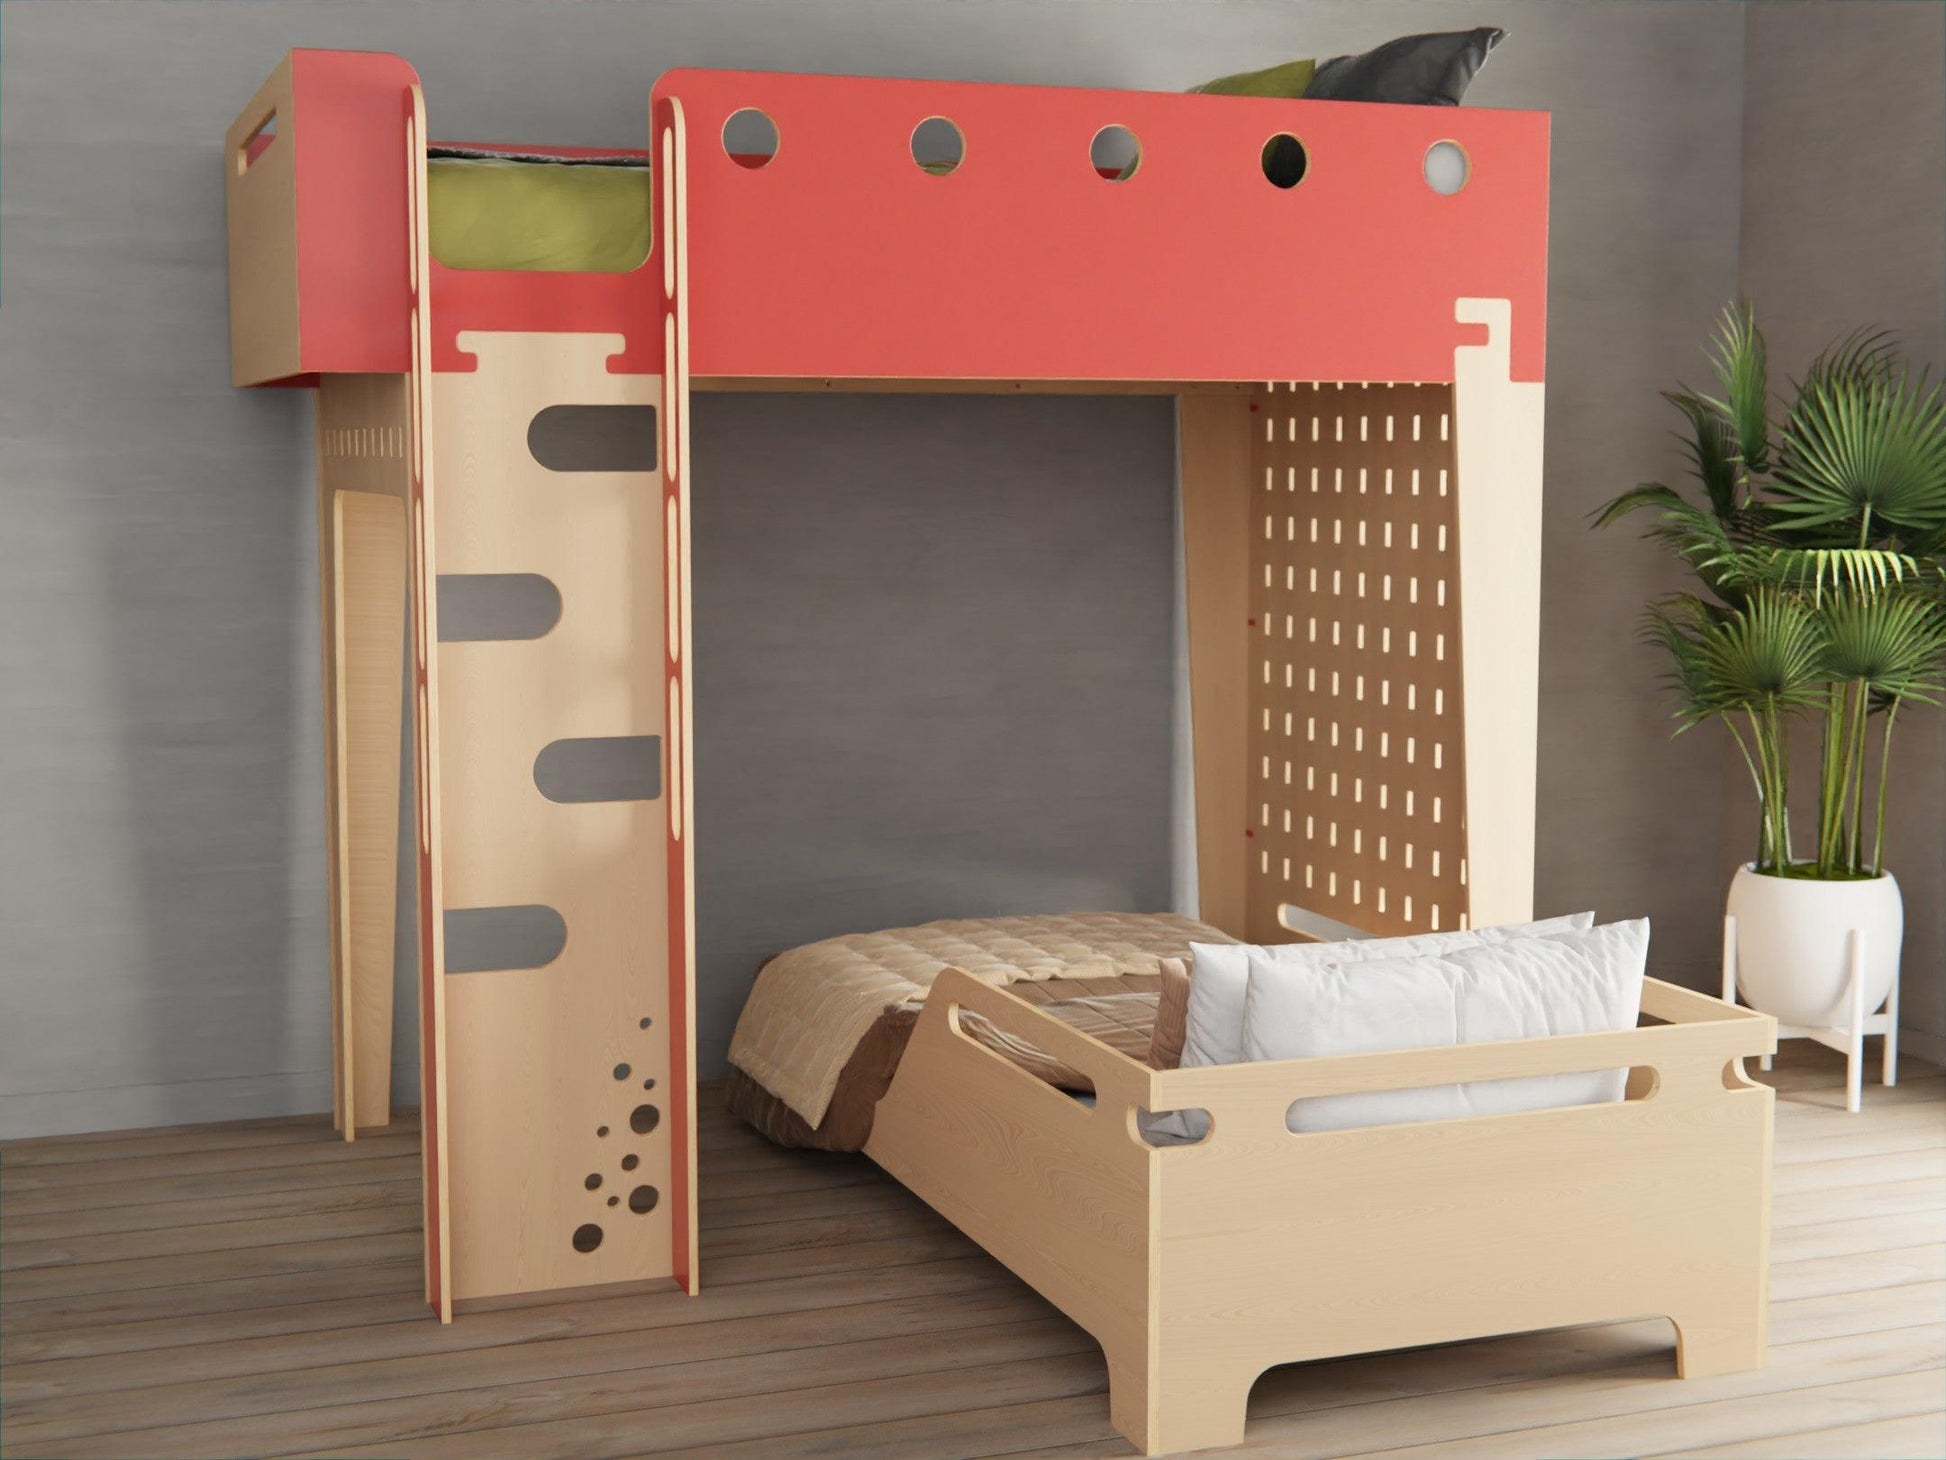 Bring home our plywood loft bed with pegboard, an elegant solution for sleep and study.